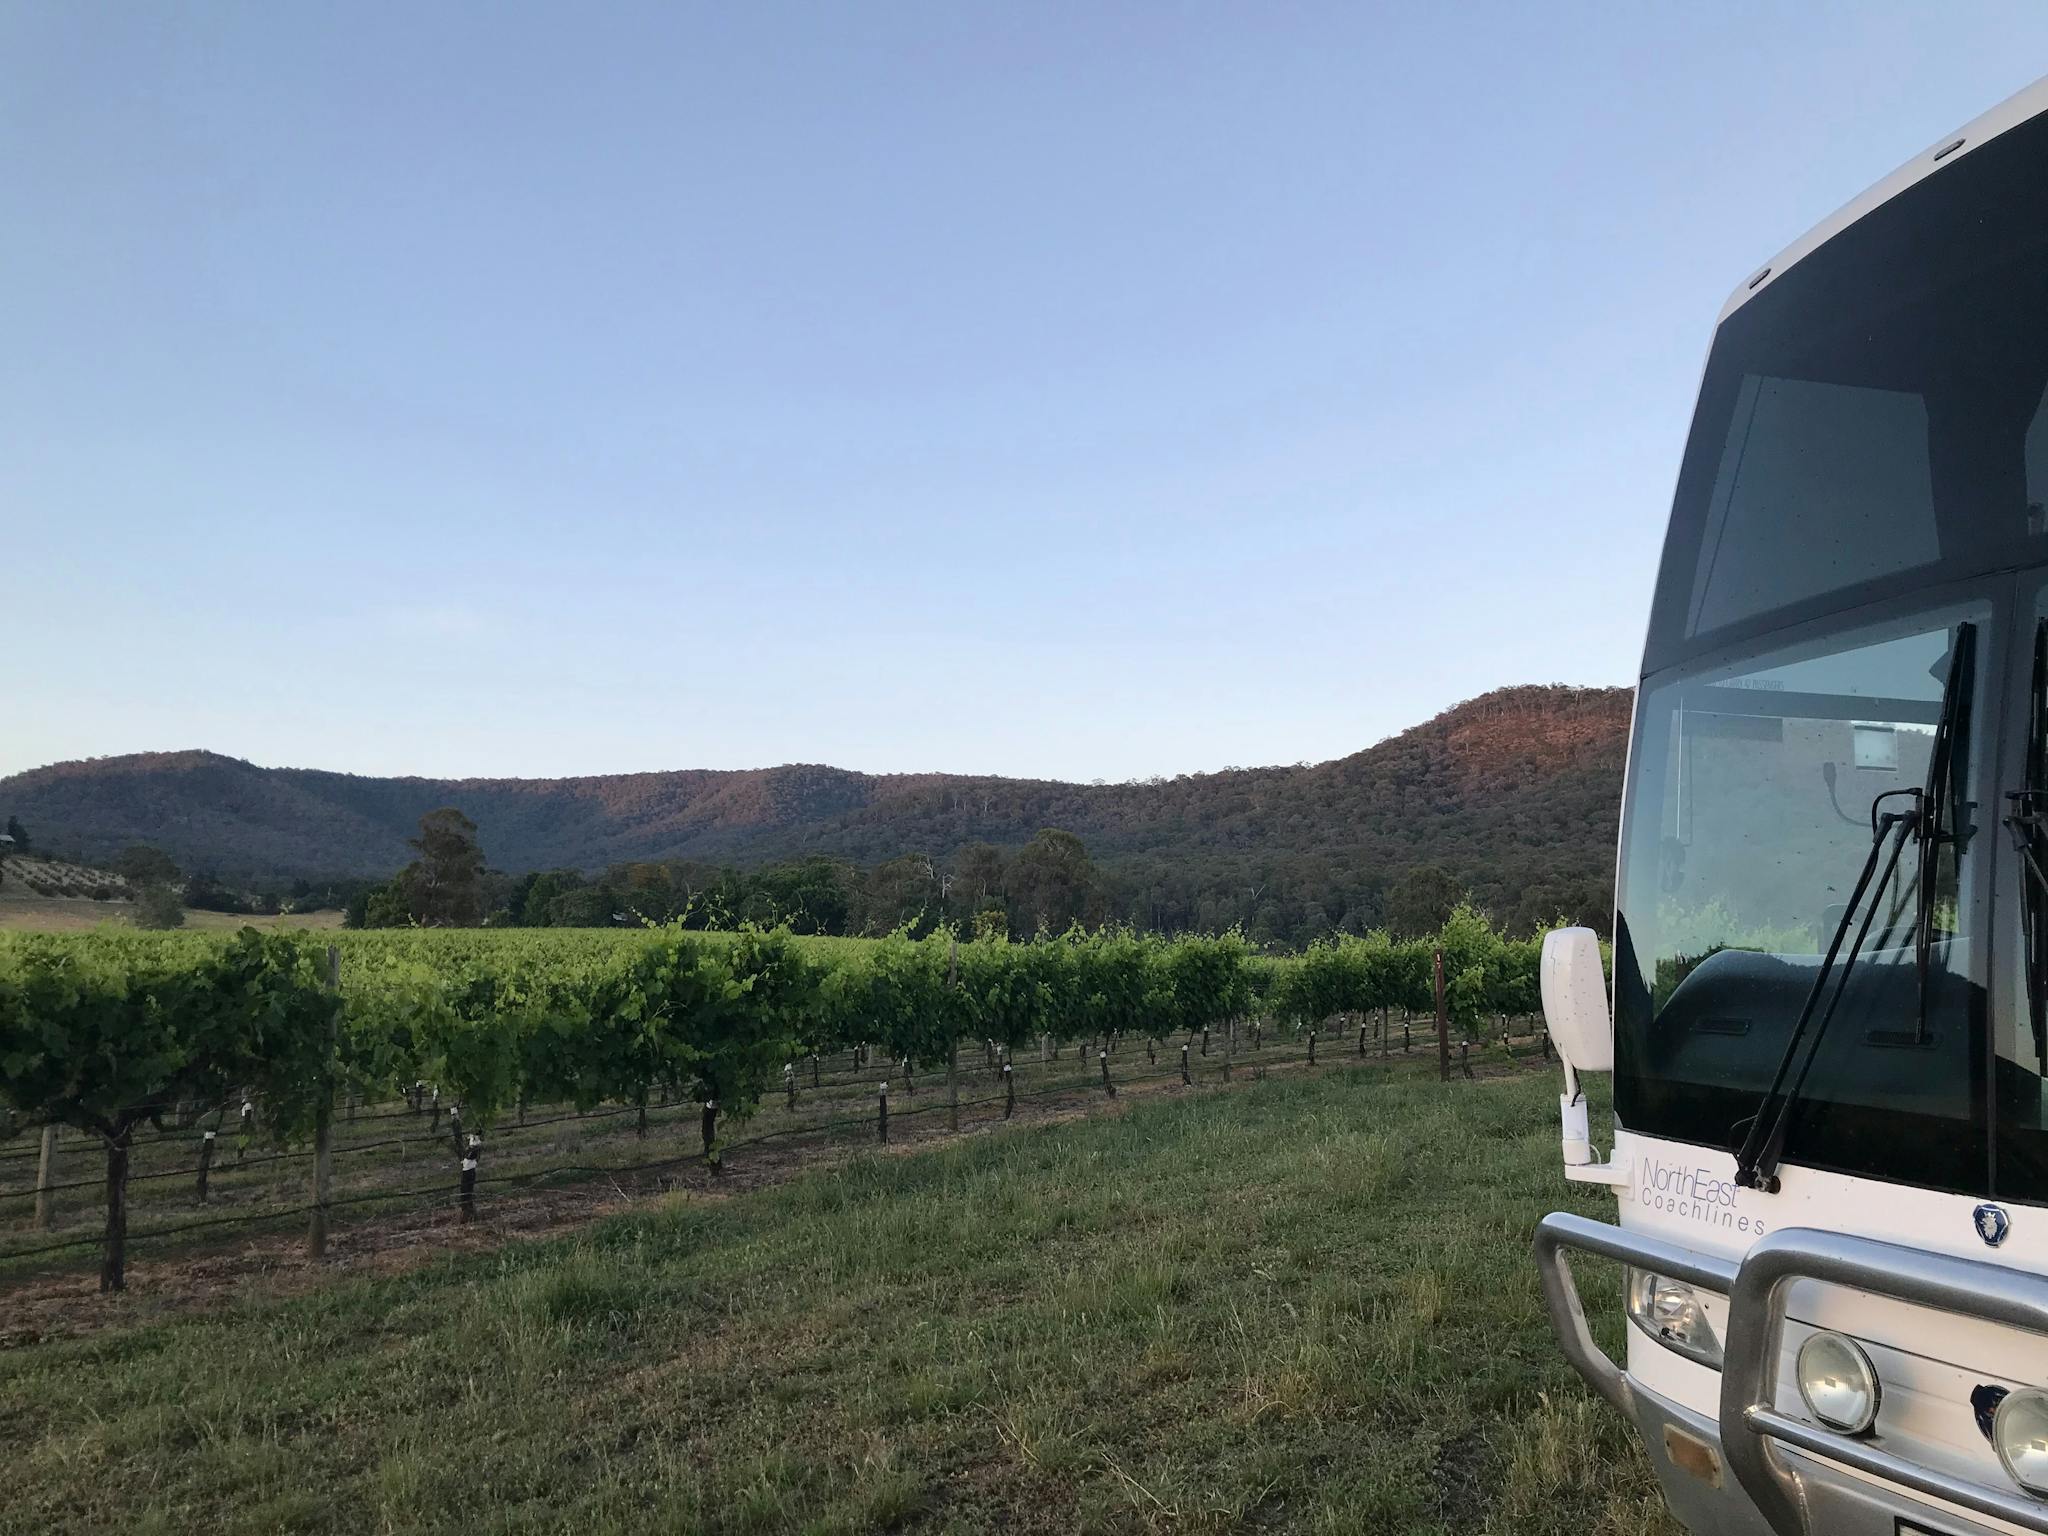 Coach front and vineyard King Valley